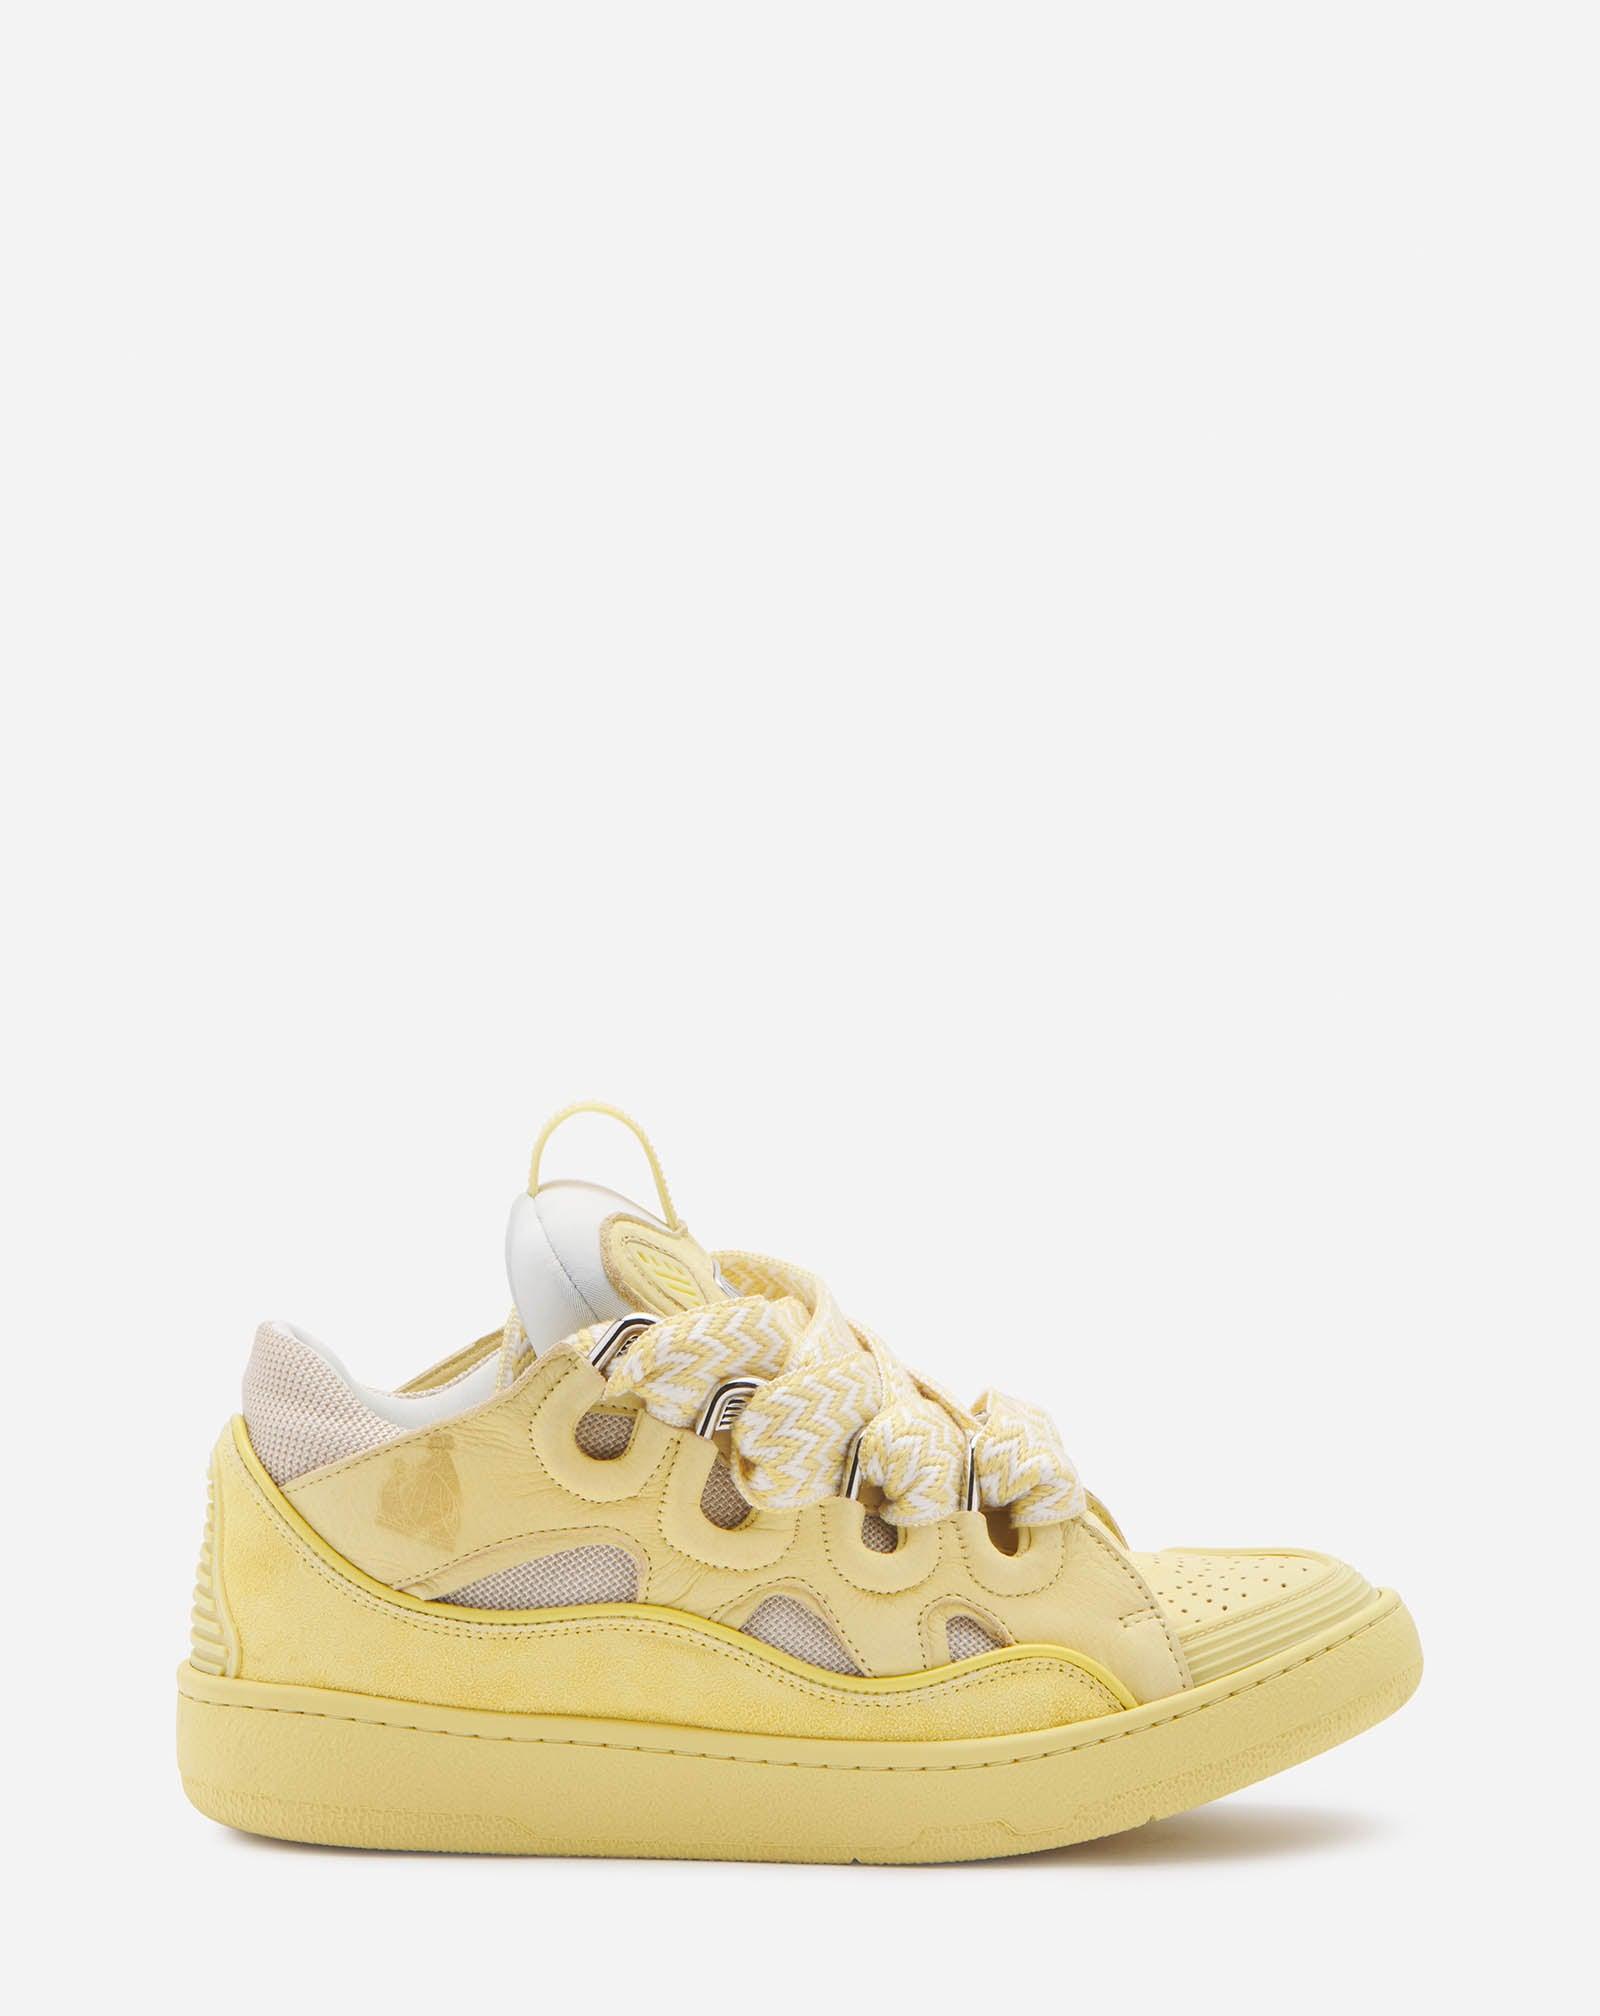 Lanvin Leather Curb Sneakers in Yellow | Lyst